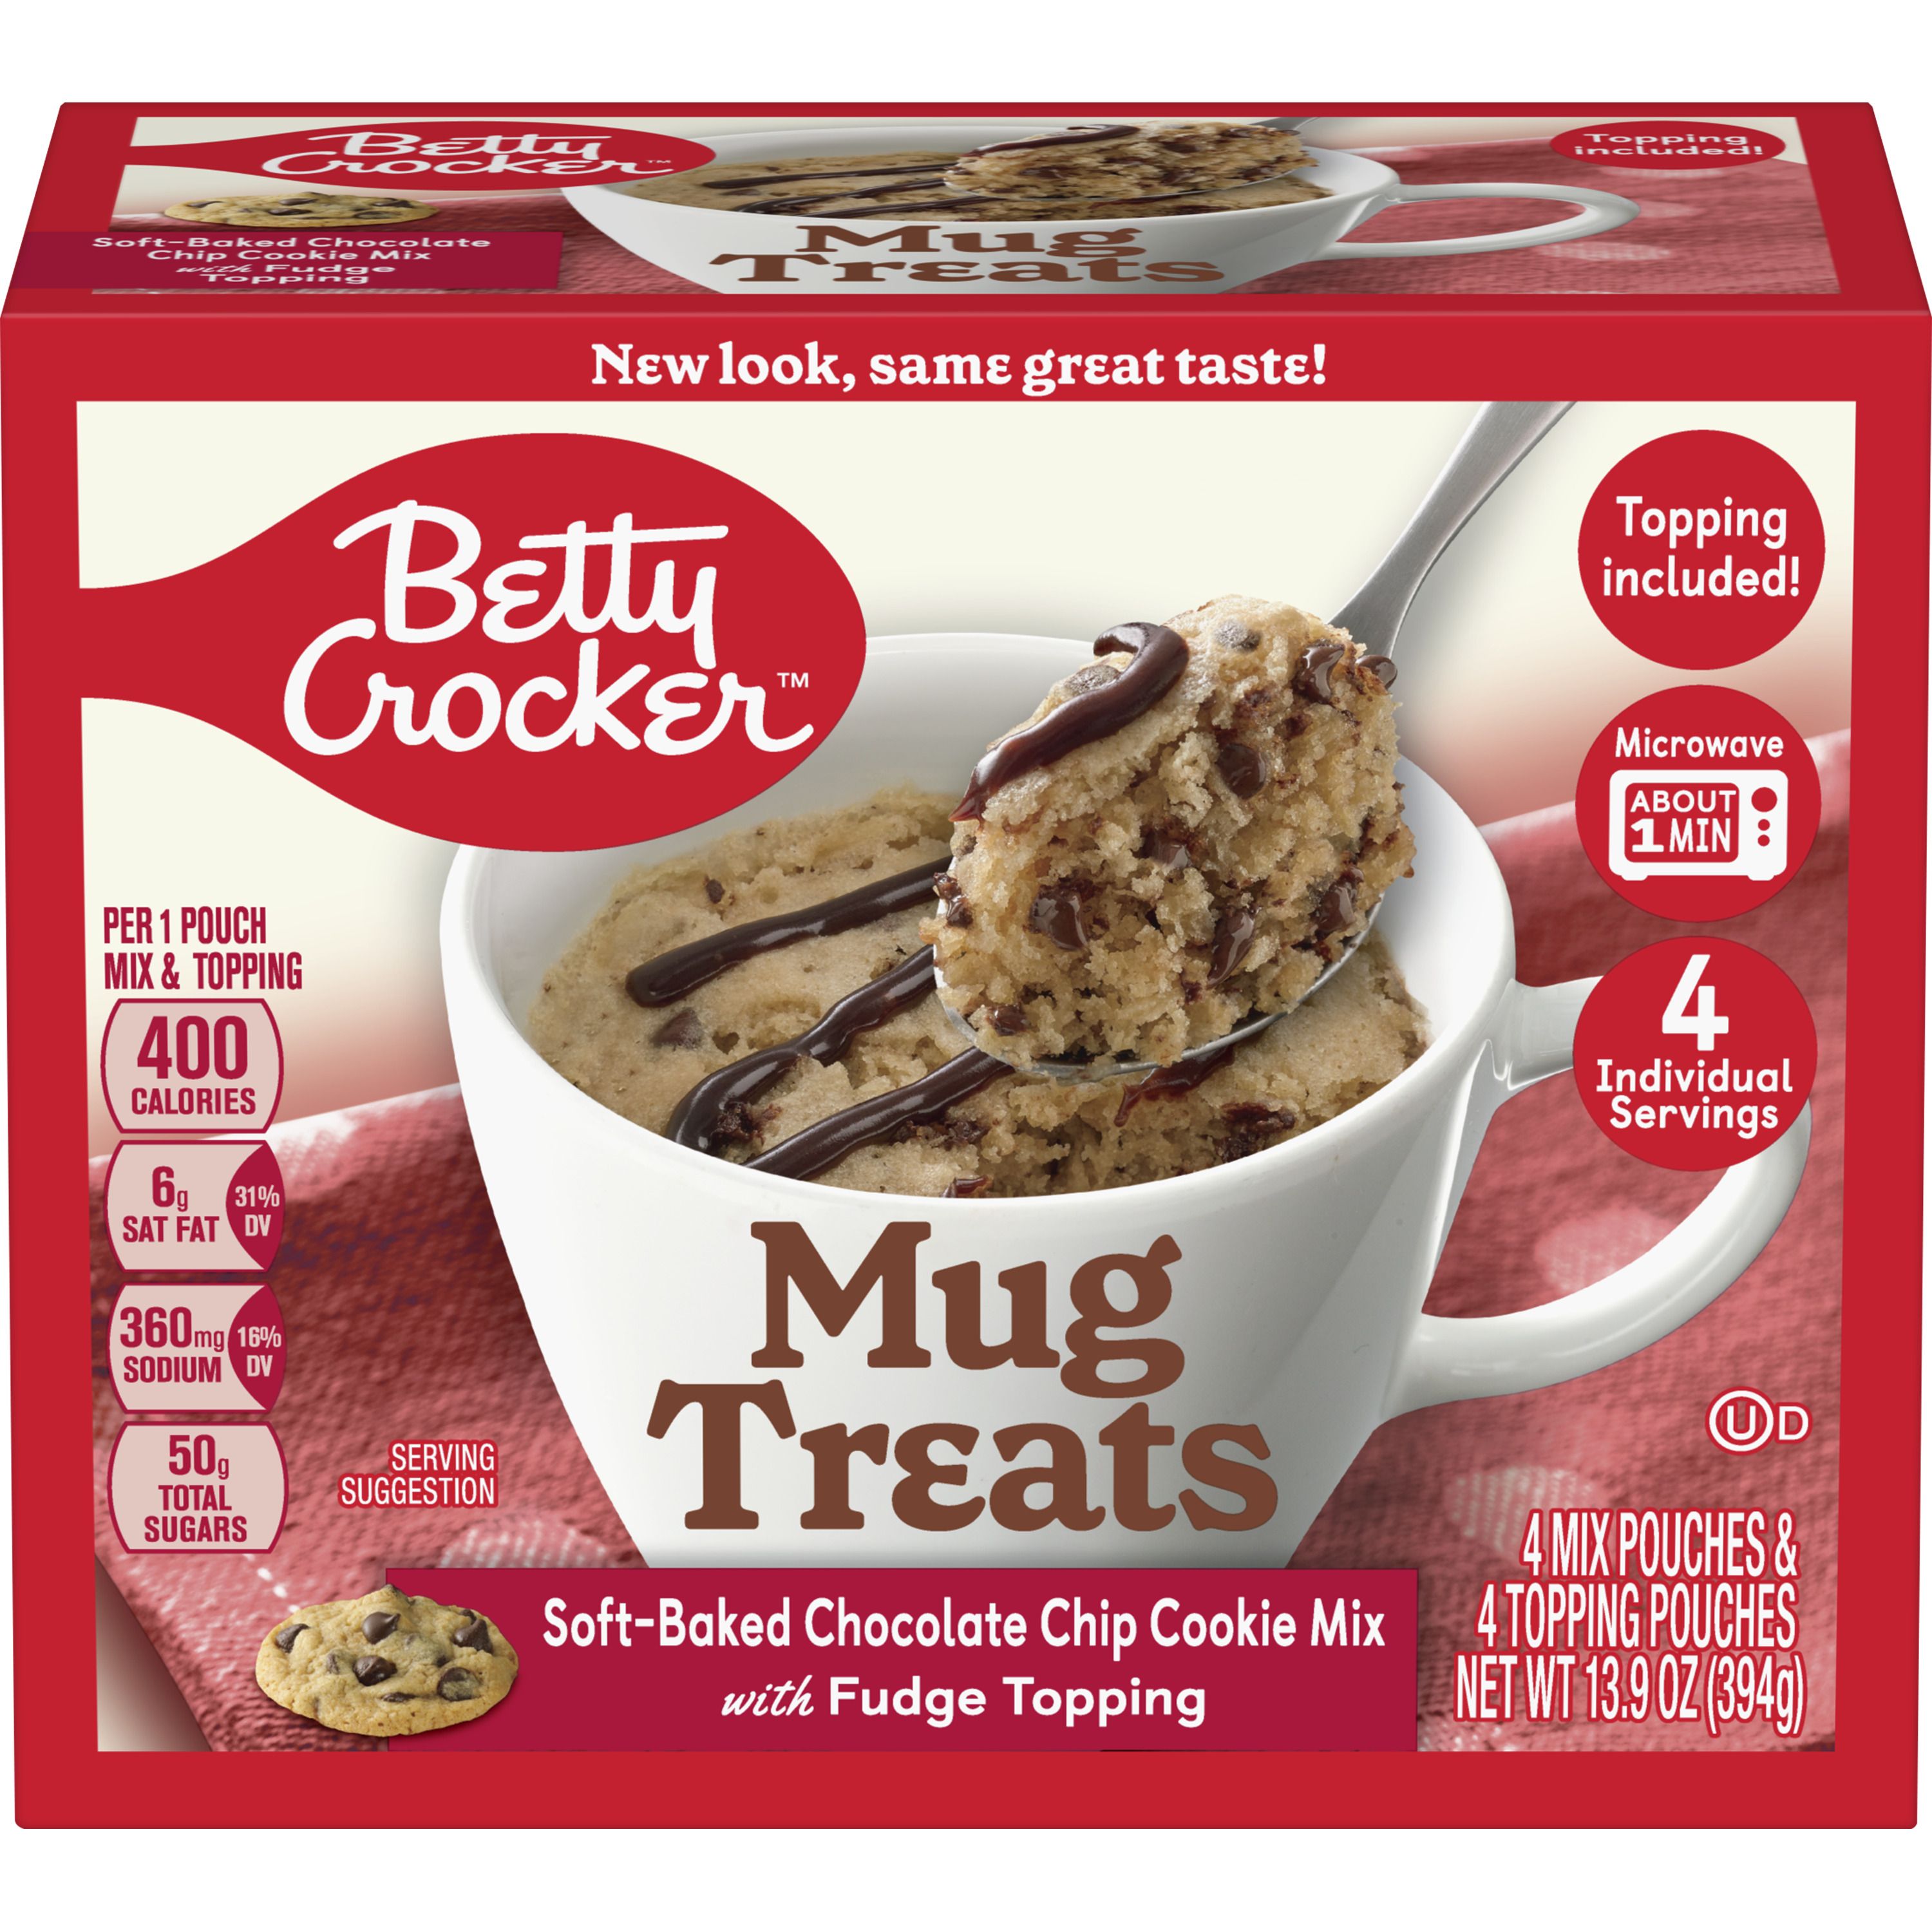 Betty Crocker™ Soft-Baked Chocolate Chip Cookie Mix Mug Treats with Fudge Topping - Front